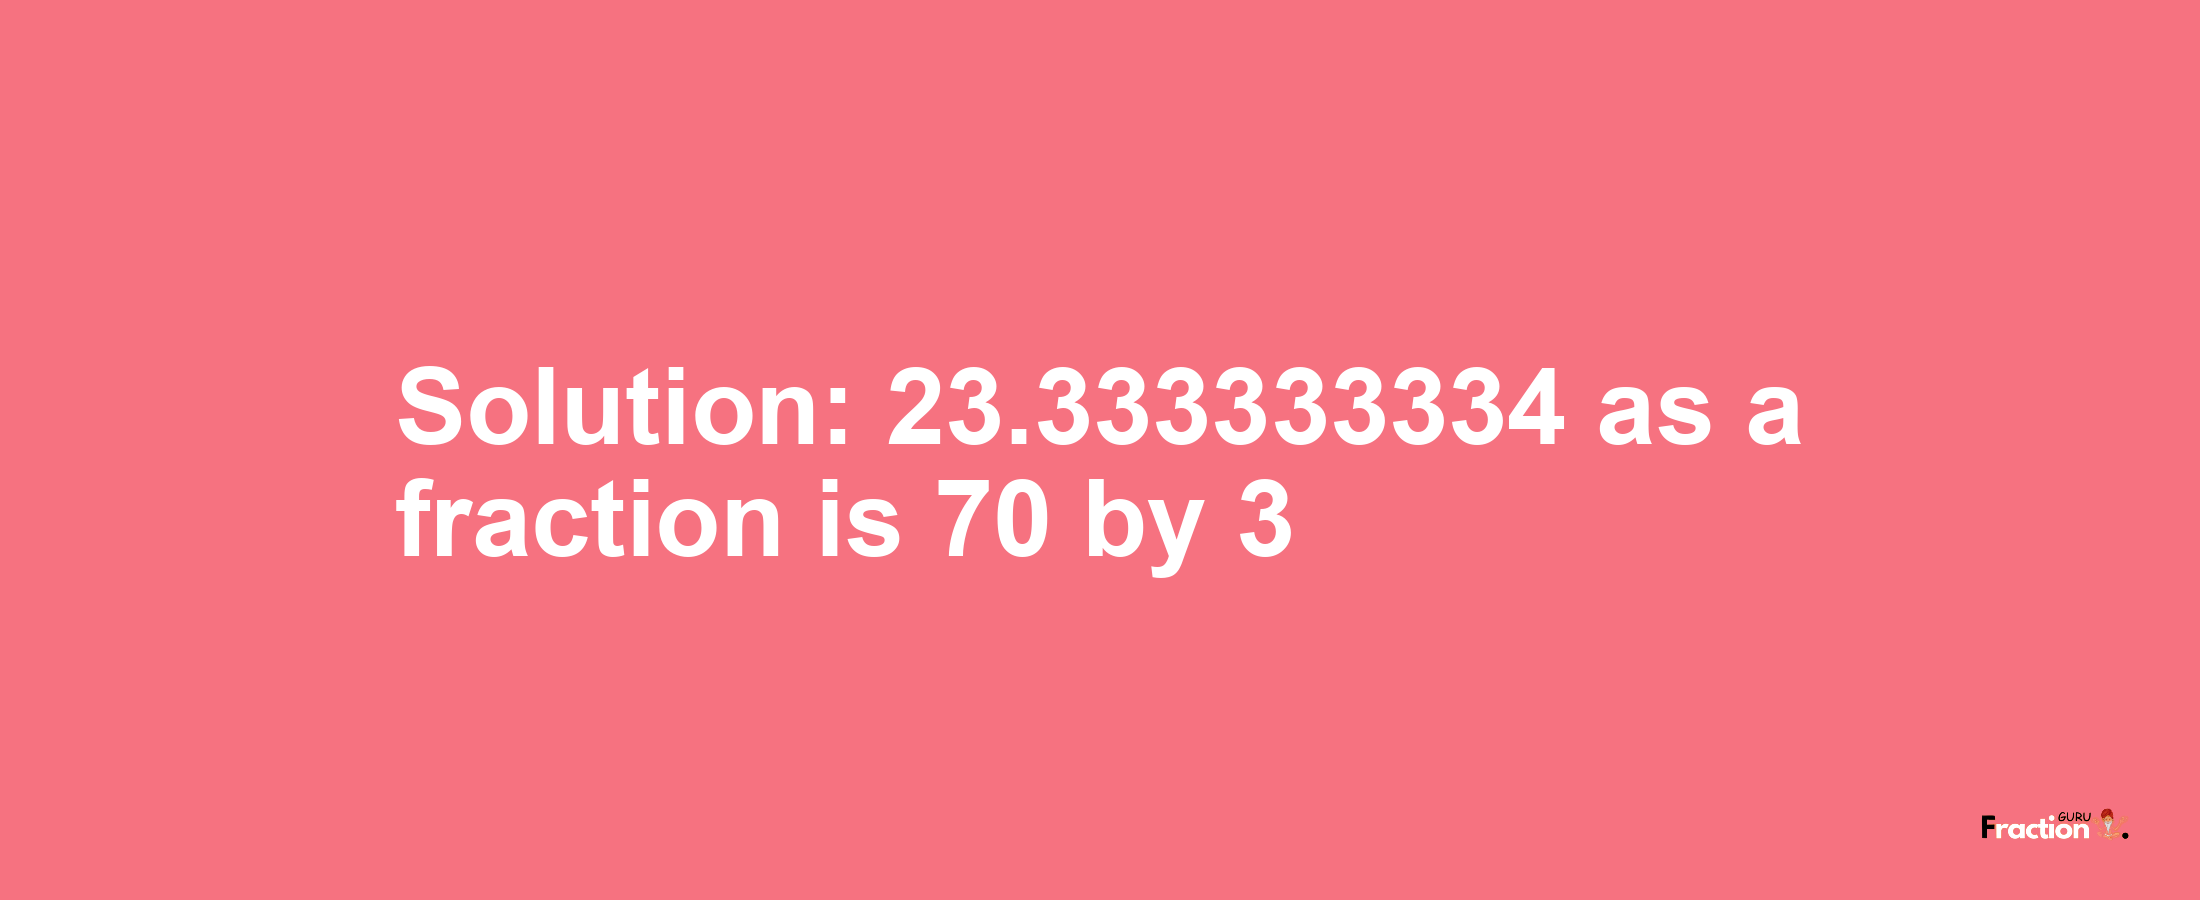 Solution:23.333333334 as a fraction is 70/3